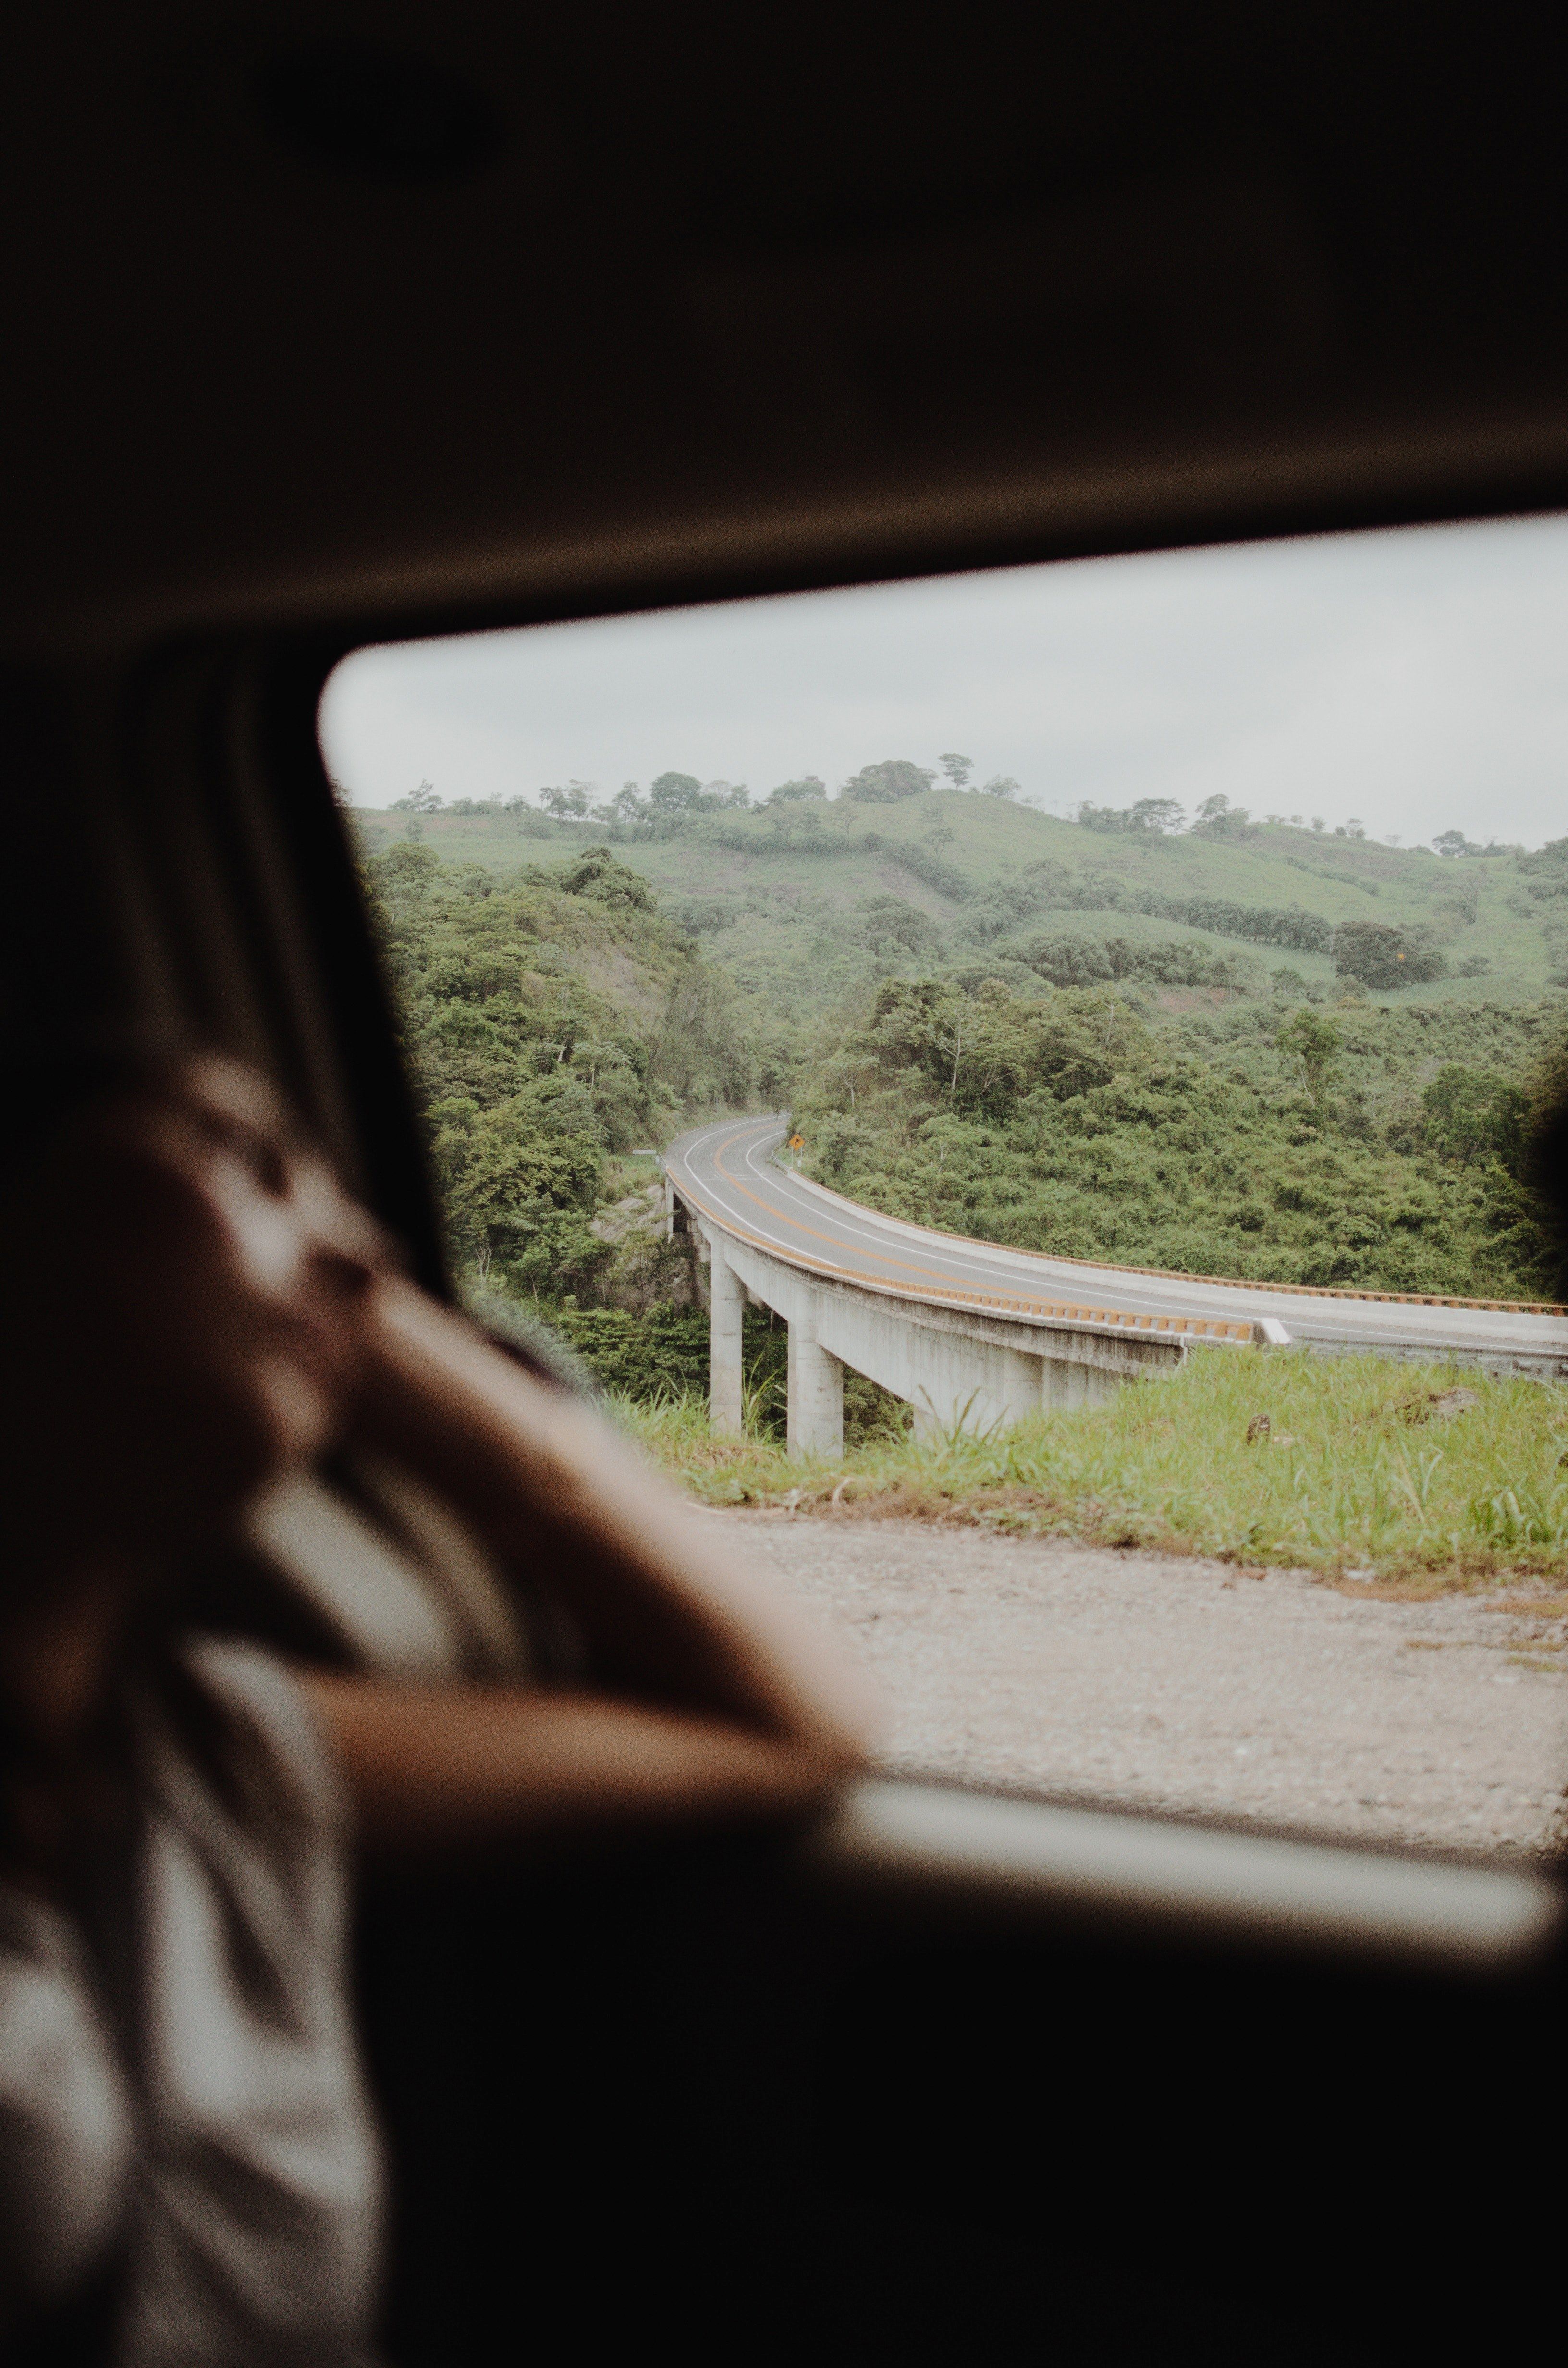 Wallpaper / blurry shot of a person looking out a car window at a countryside, infinite road from chiapas to tabasco 4k wallpaper free download